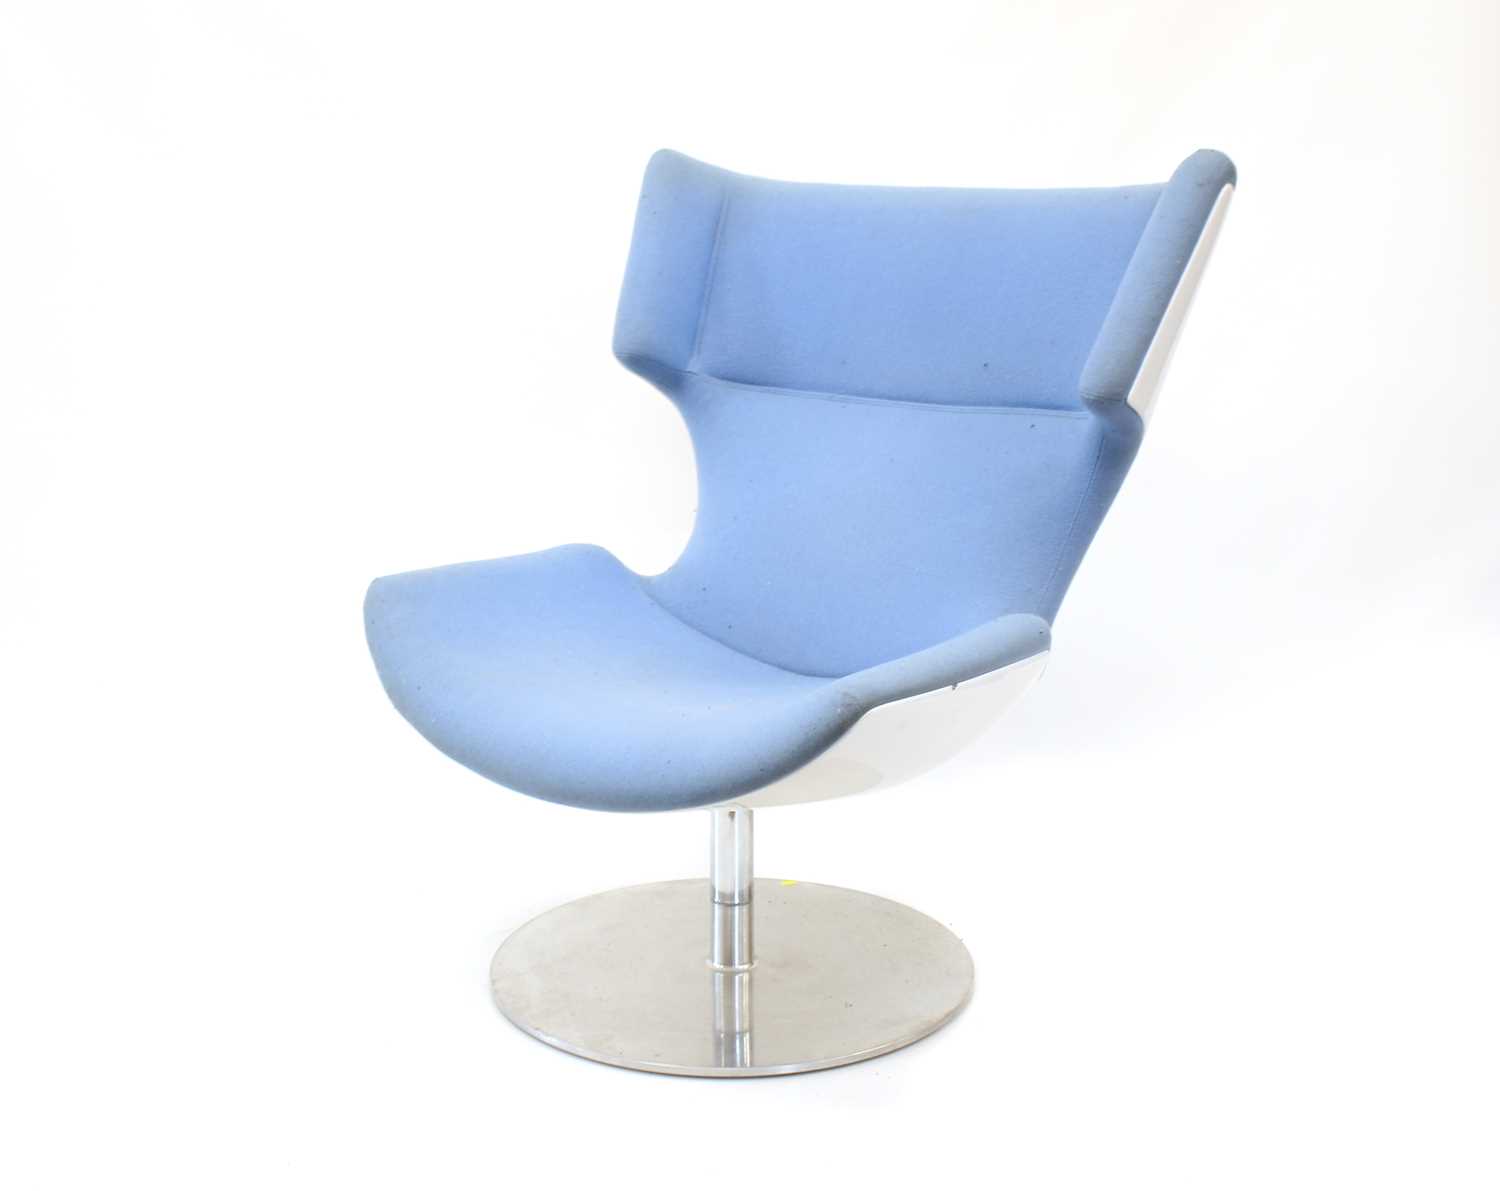 Patrick Nourget (French 1969-) for Artifort "Boson" Lounge Chair - Image 4 of 17